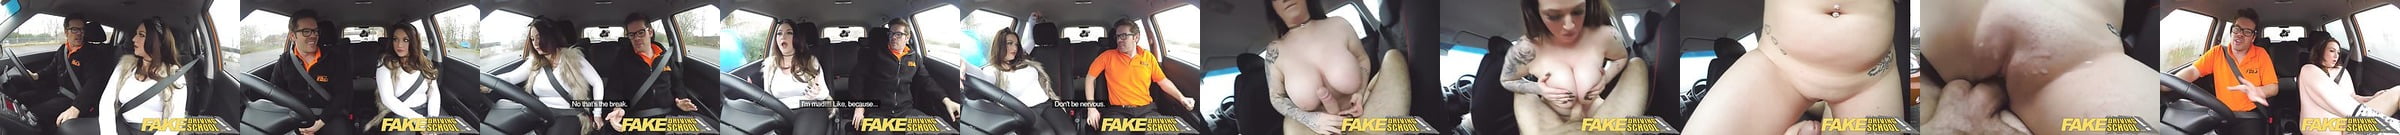 Fake Taxi Nice Big Tits Get Fucked And Sucked Free Porn 9b Jp